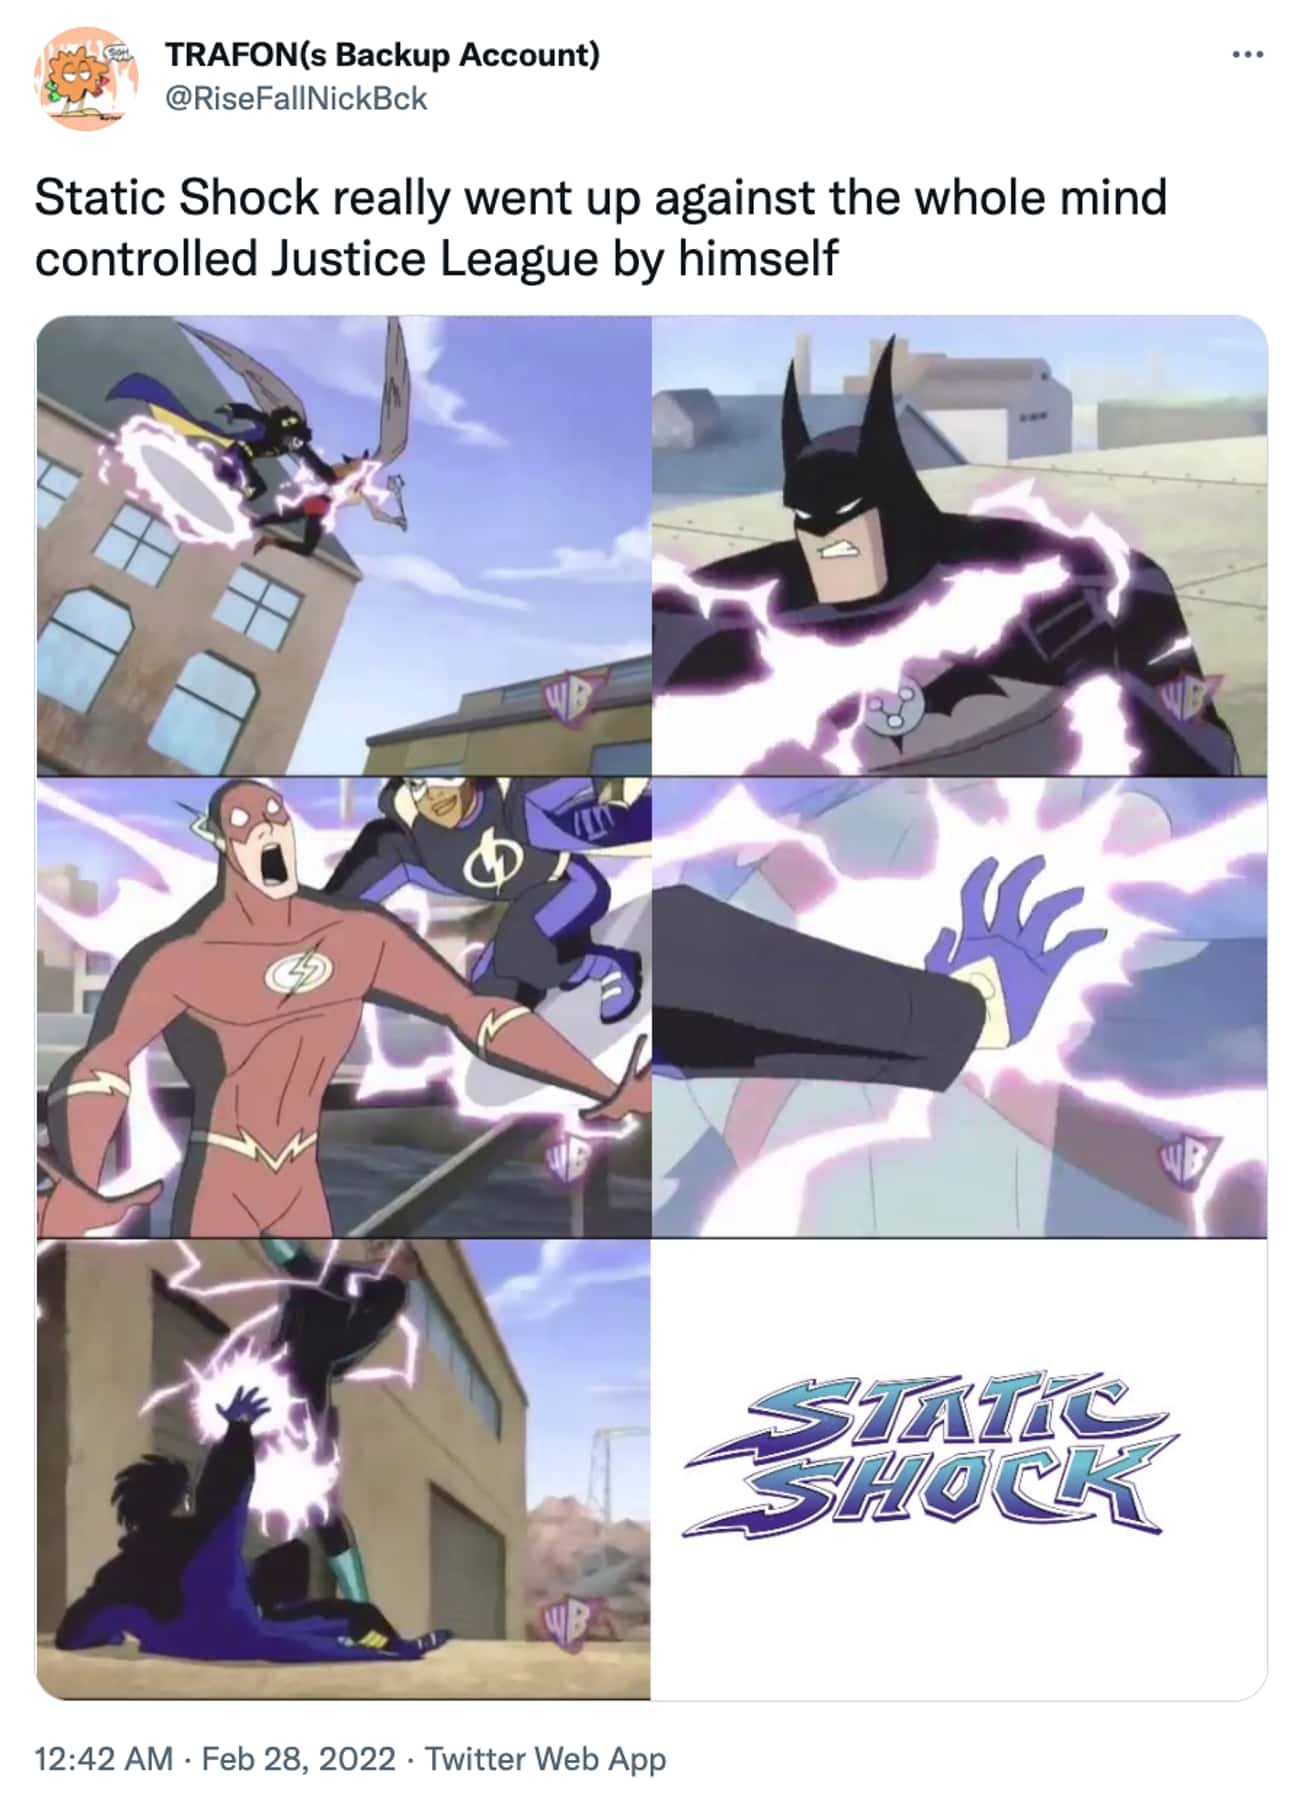 Static Shock Was A Fearless Superhero